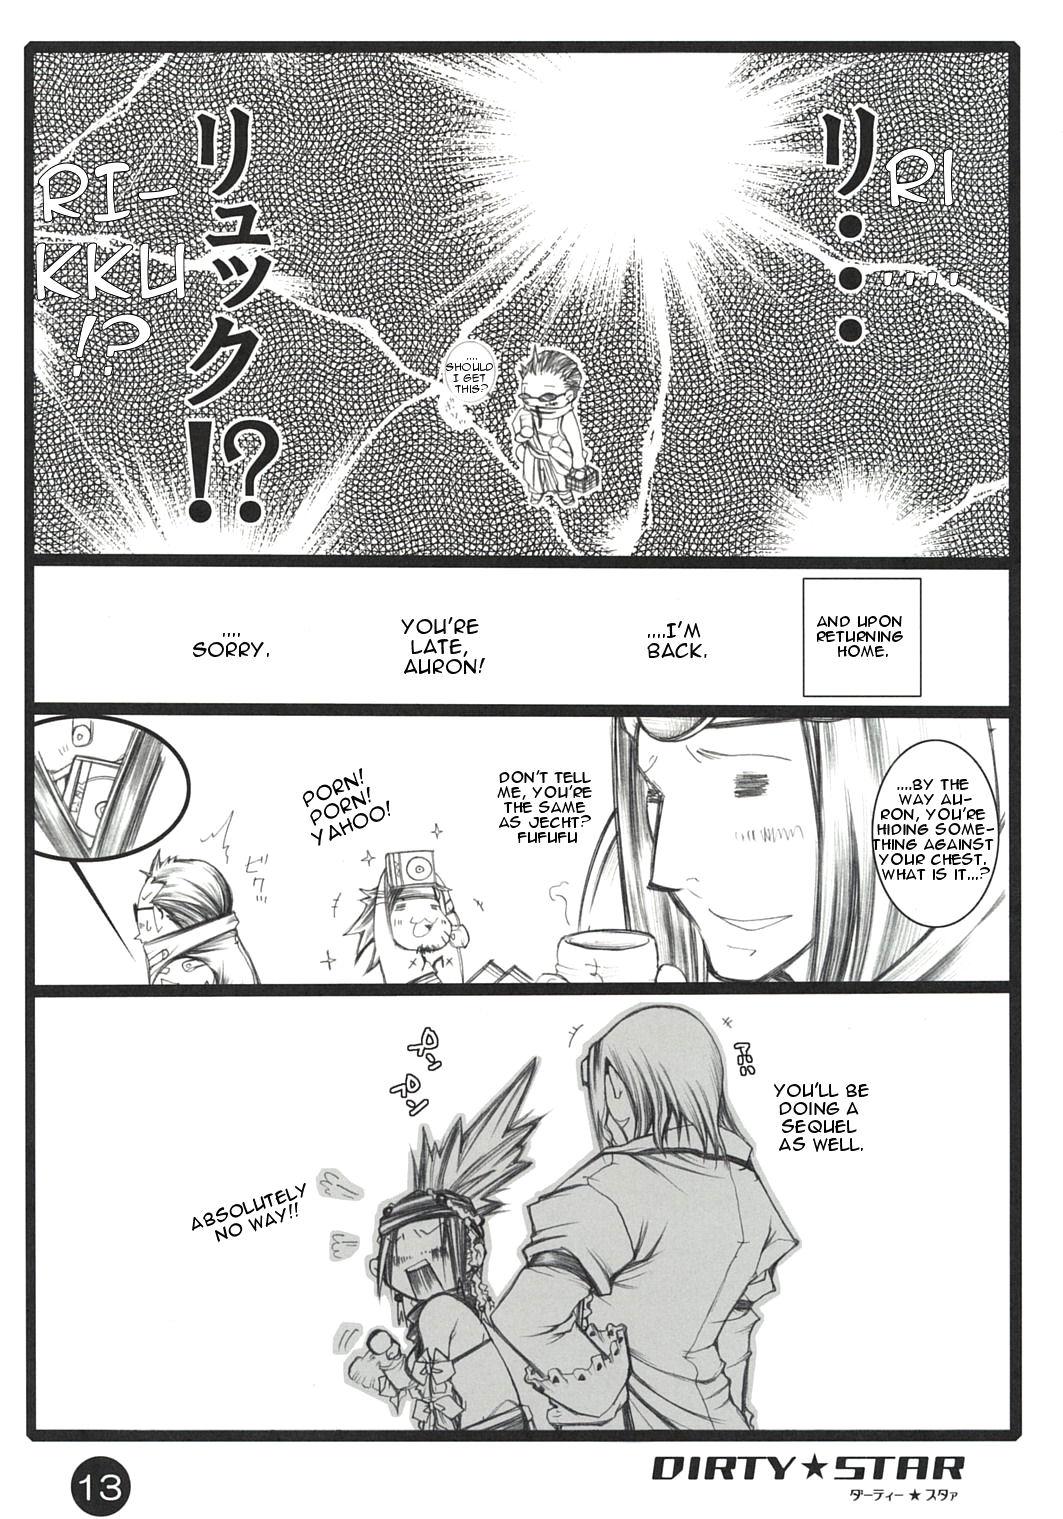 Small Boobs Dirty Star - Final fantasy x-2 Submissive - Page 12